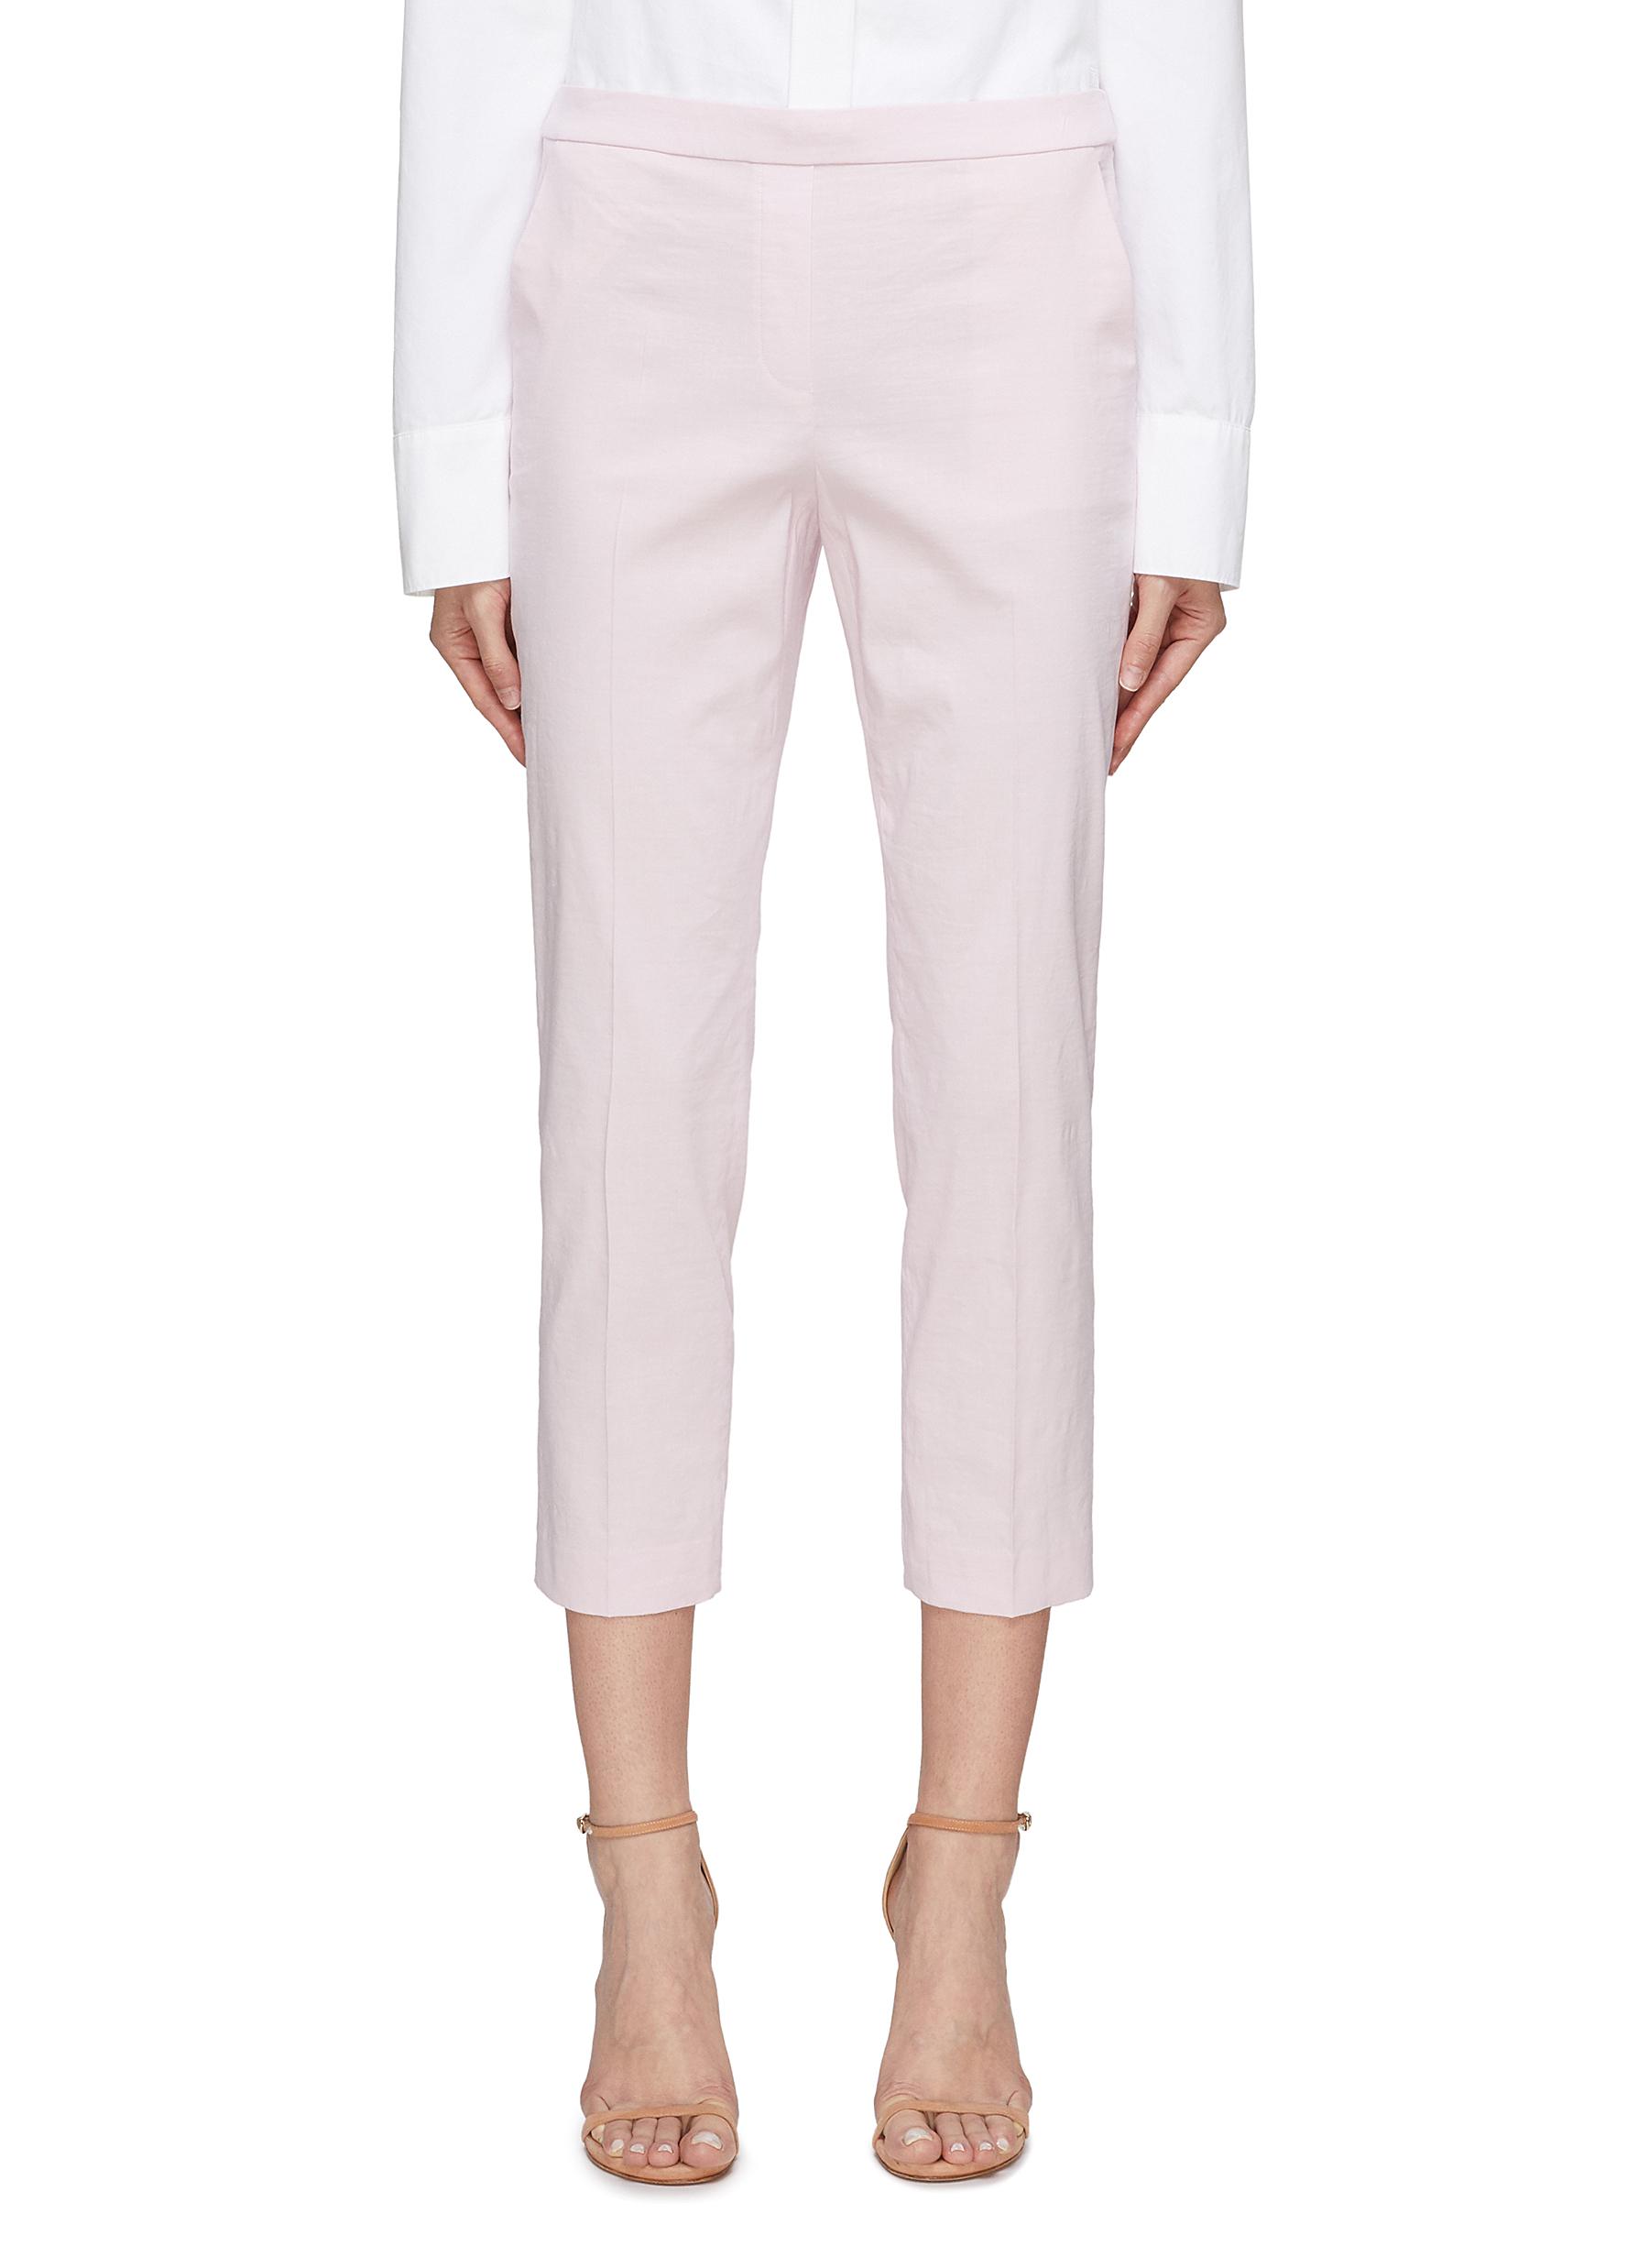 THEORY, Treeca' Cropped Pull On Pants, PINK, Women